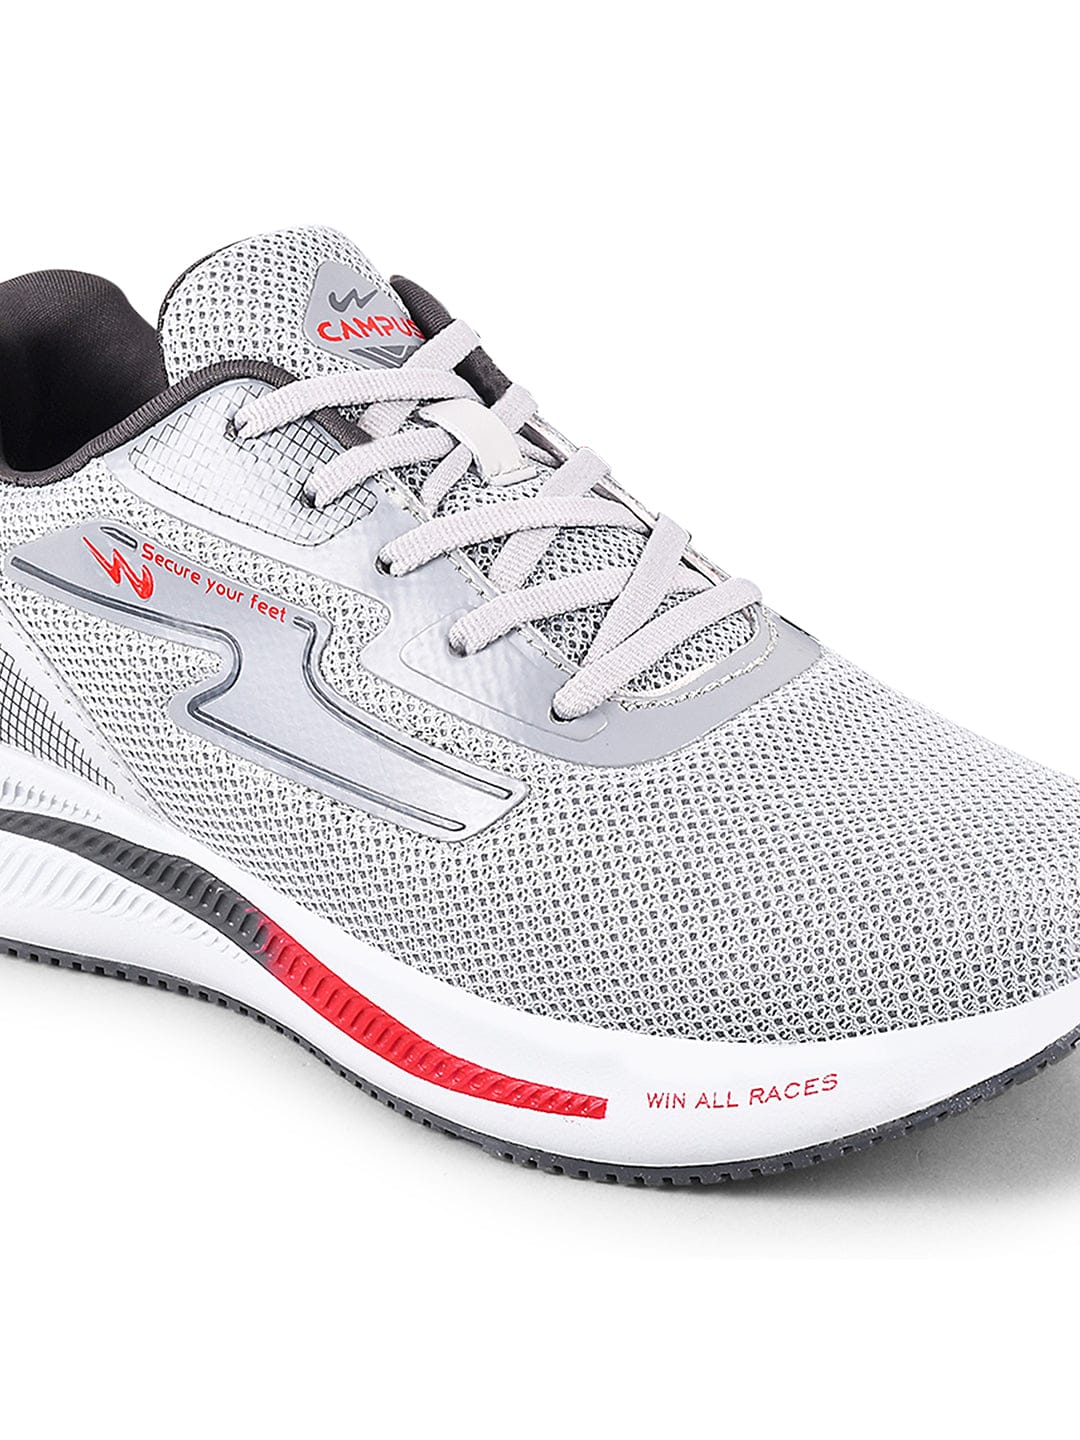 Buy CAMP-RAMBO Grey Men's Running Shoes online | Campus Shoes